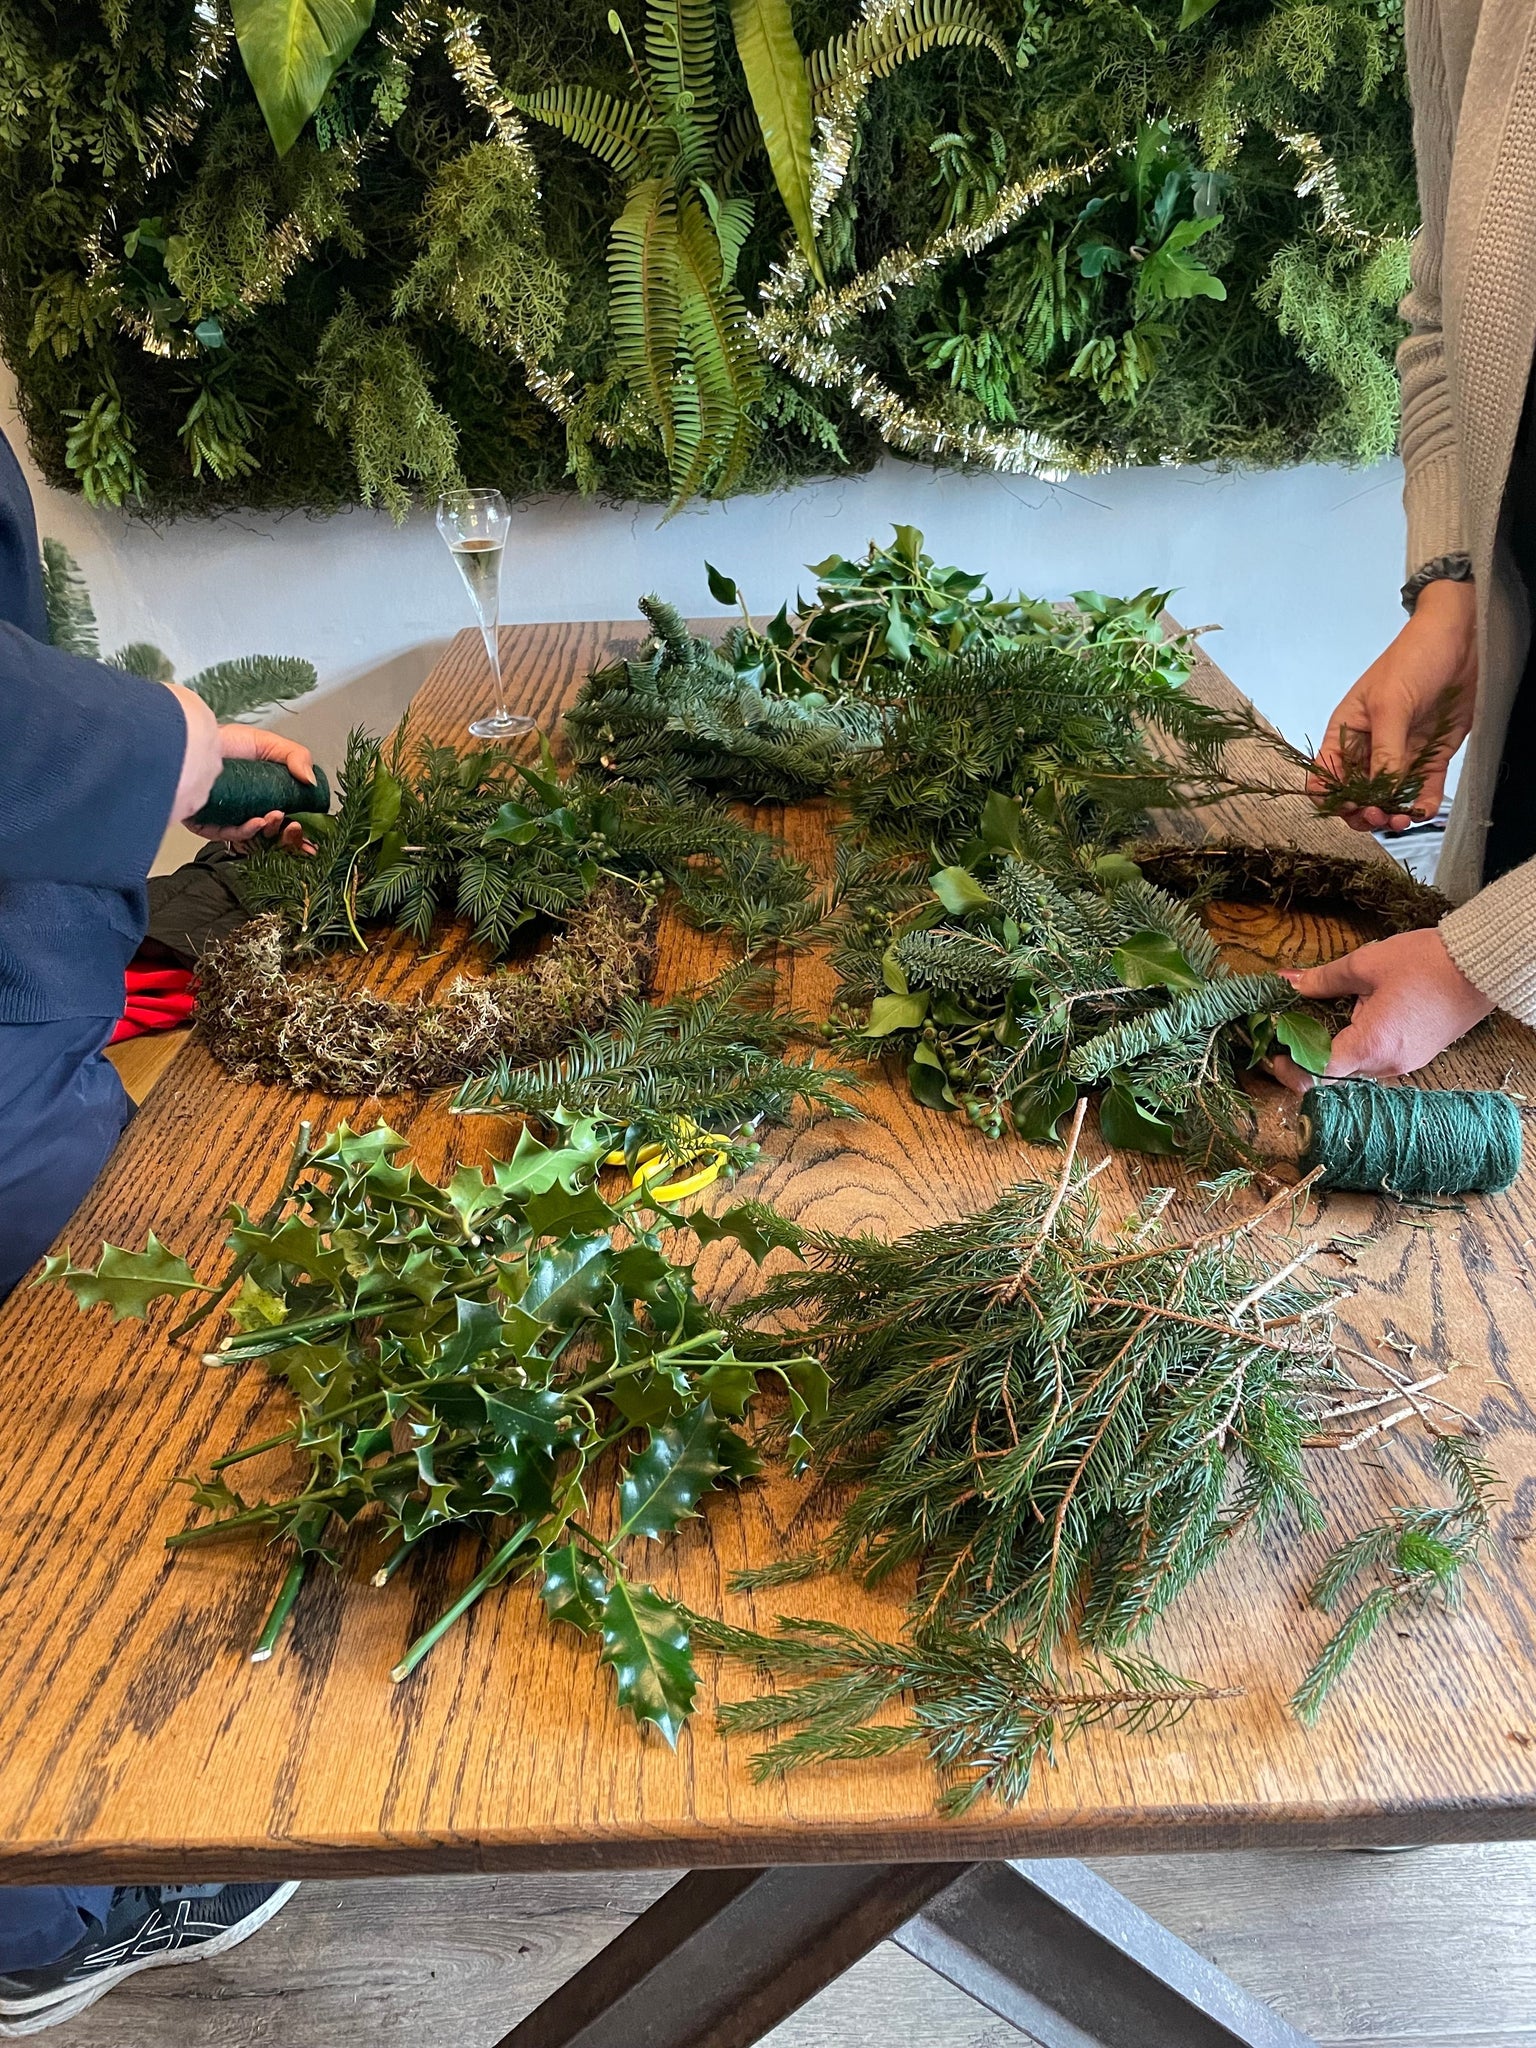 Christmas Wreath Workshop – Wednesday 29th November, Starting @ 11am (£75 per person) 2.5 hours